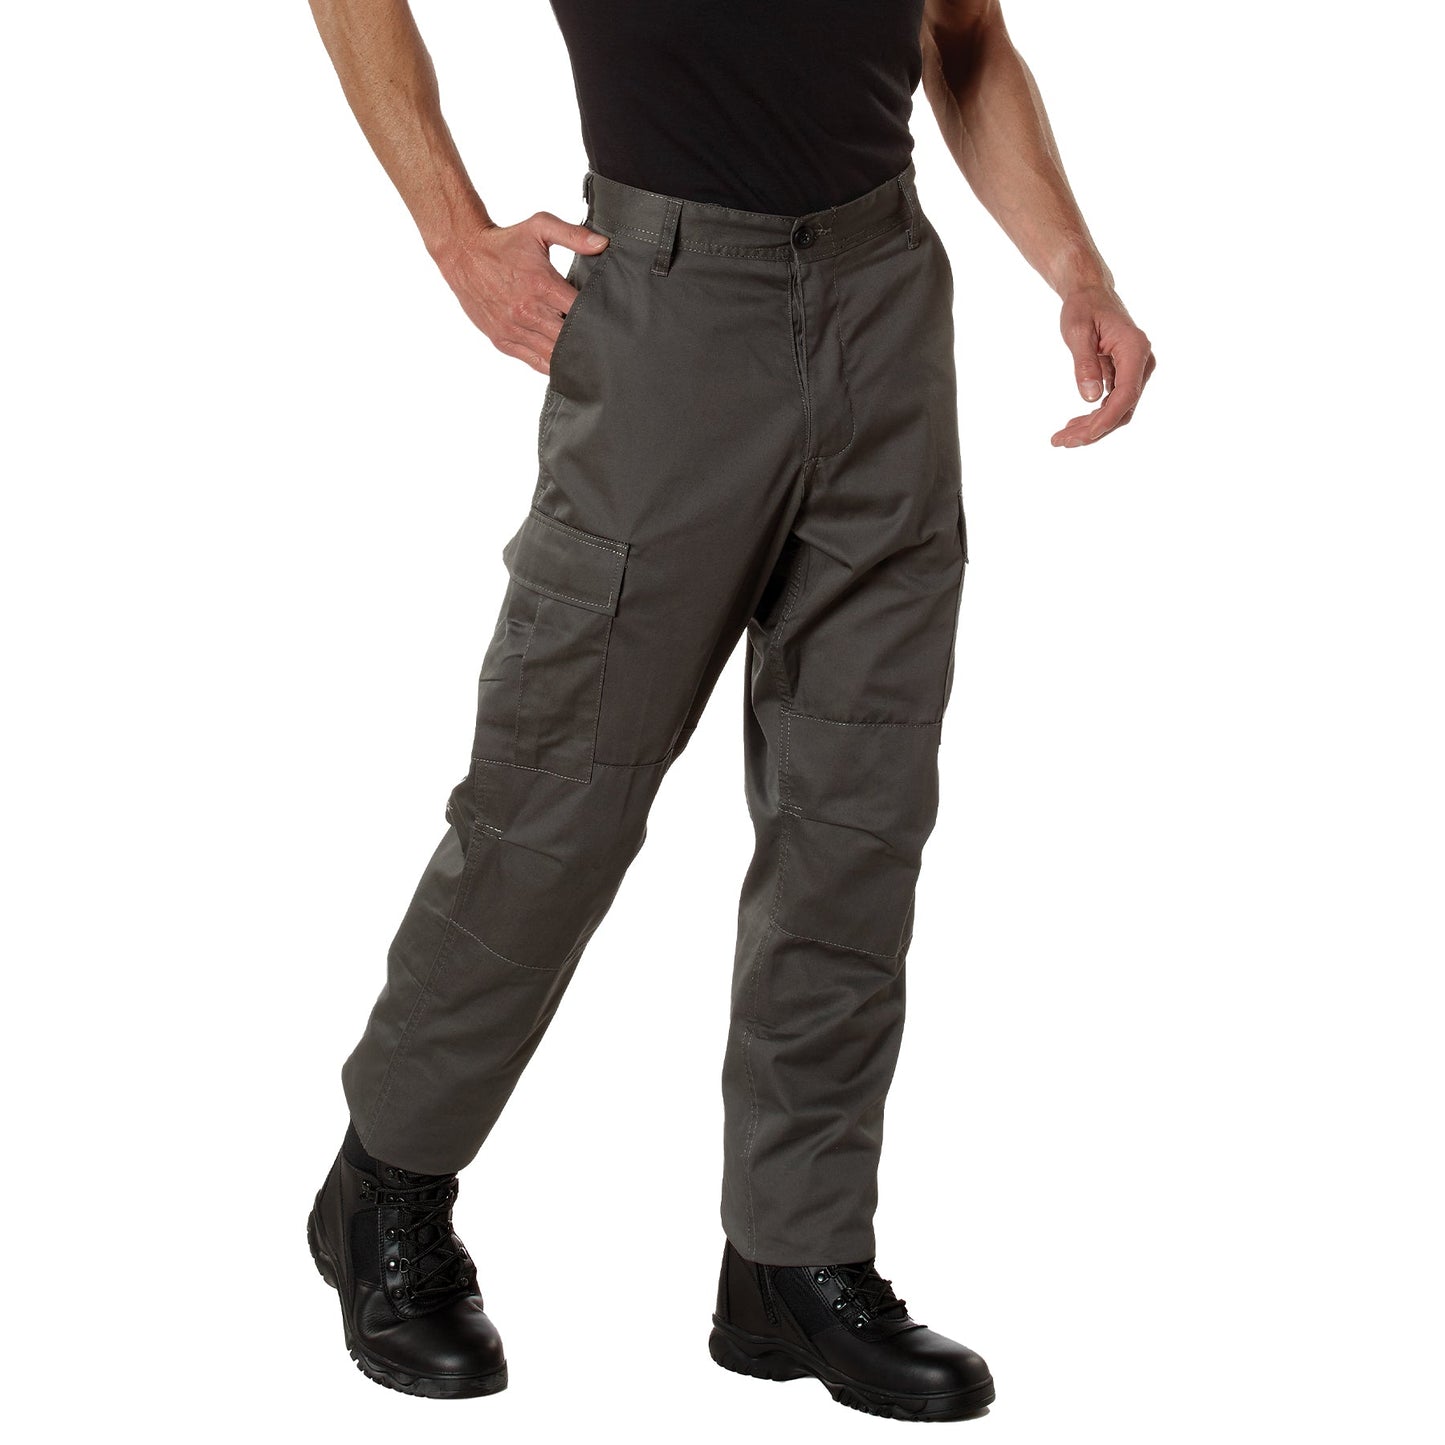 Rothco Unisex Tactical BDU Cargo Pants